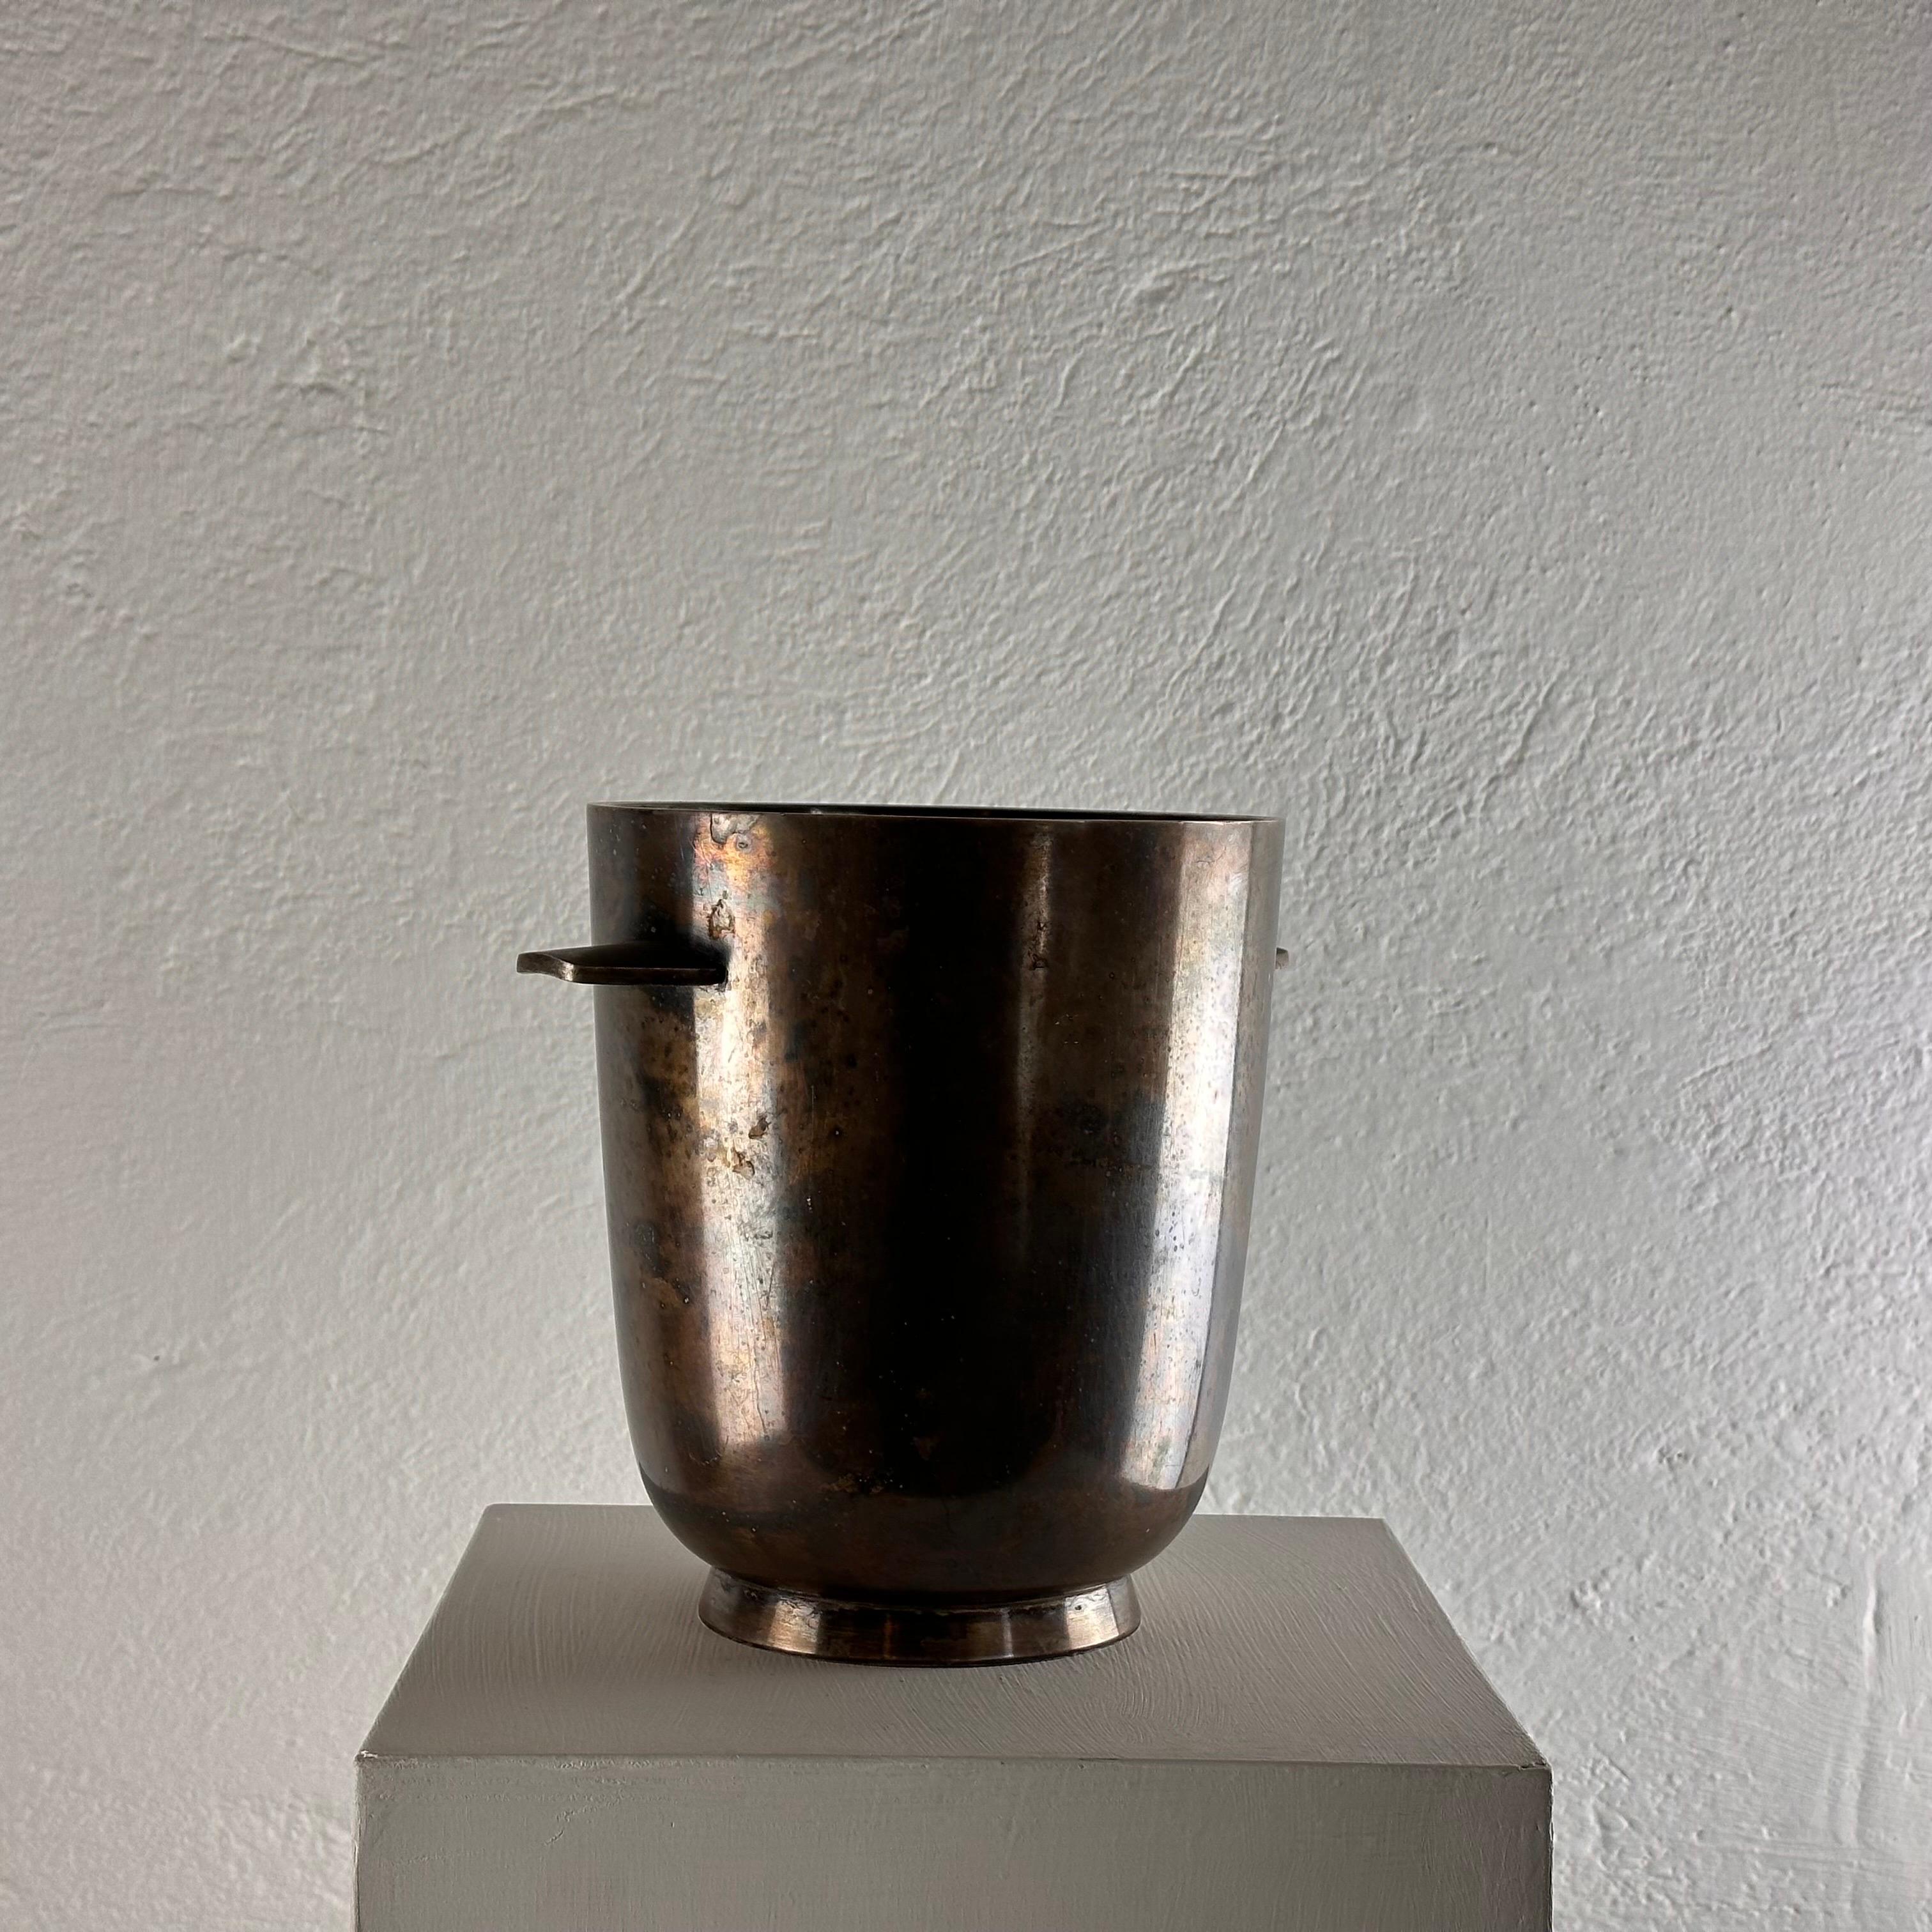 Step into luxury with this exquisite Gio Ponti Silver Plate Champagne Holder crafted for Fratelli Calderoni, Italy, in the glamorous 1960s era. Boasting a rich patina that tells the story of its prestigious history, this stunning piece measures 20